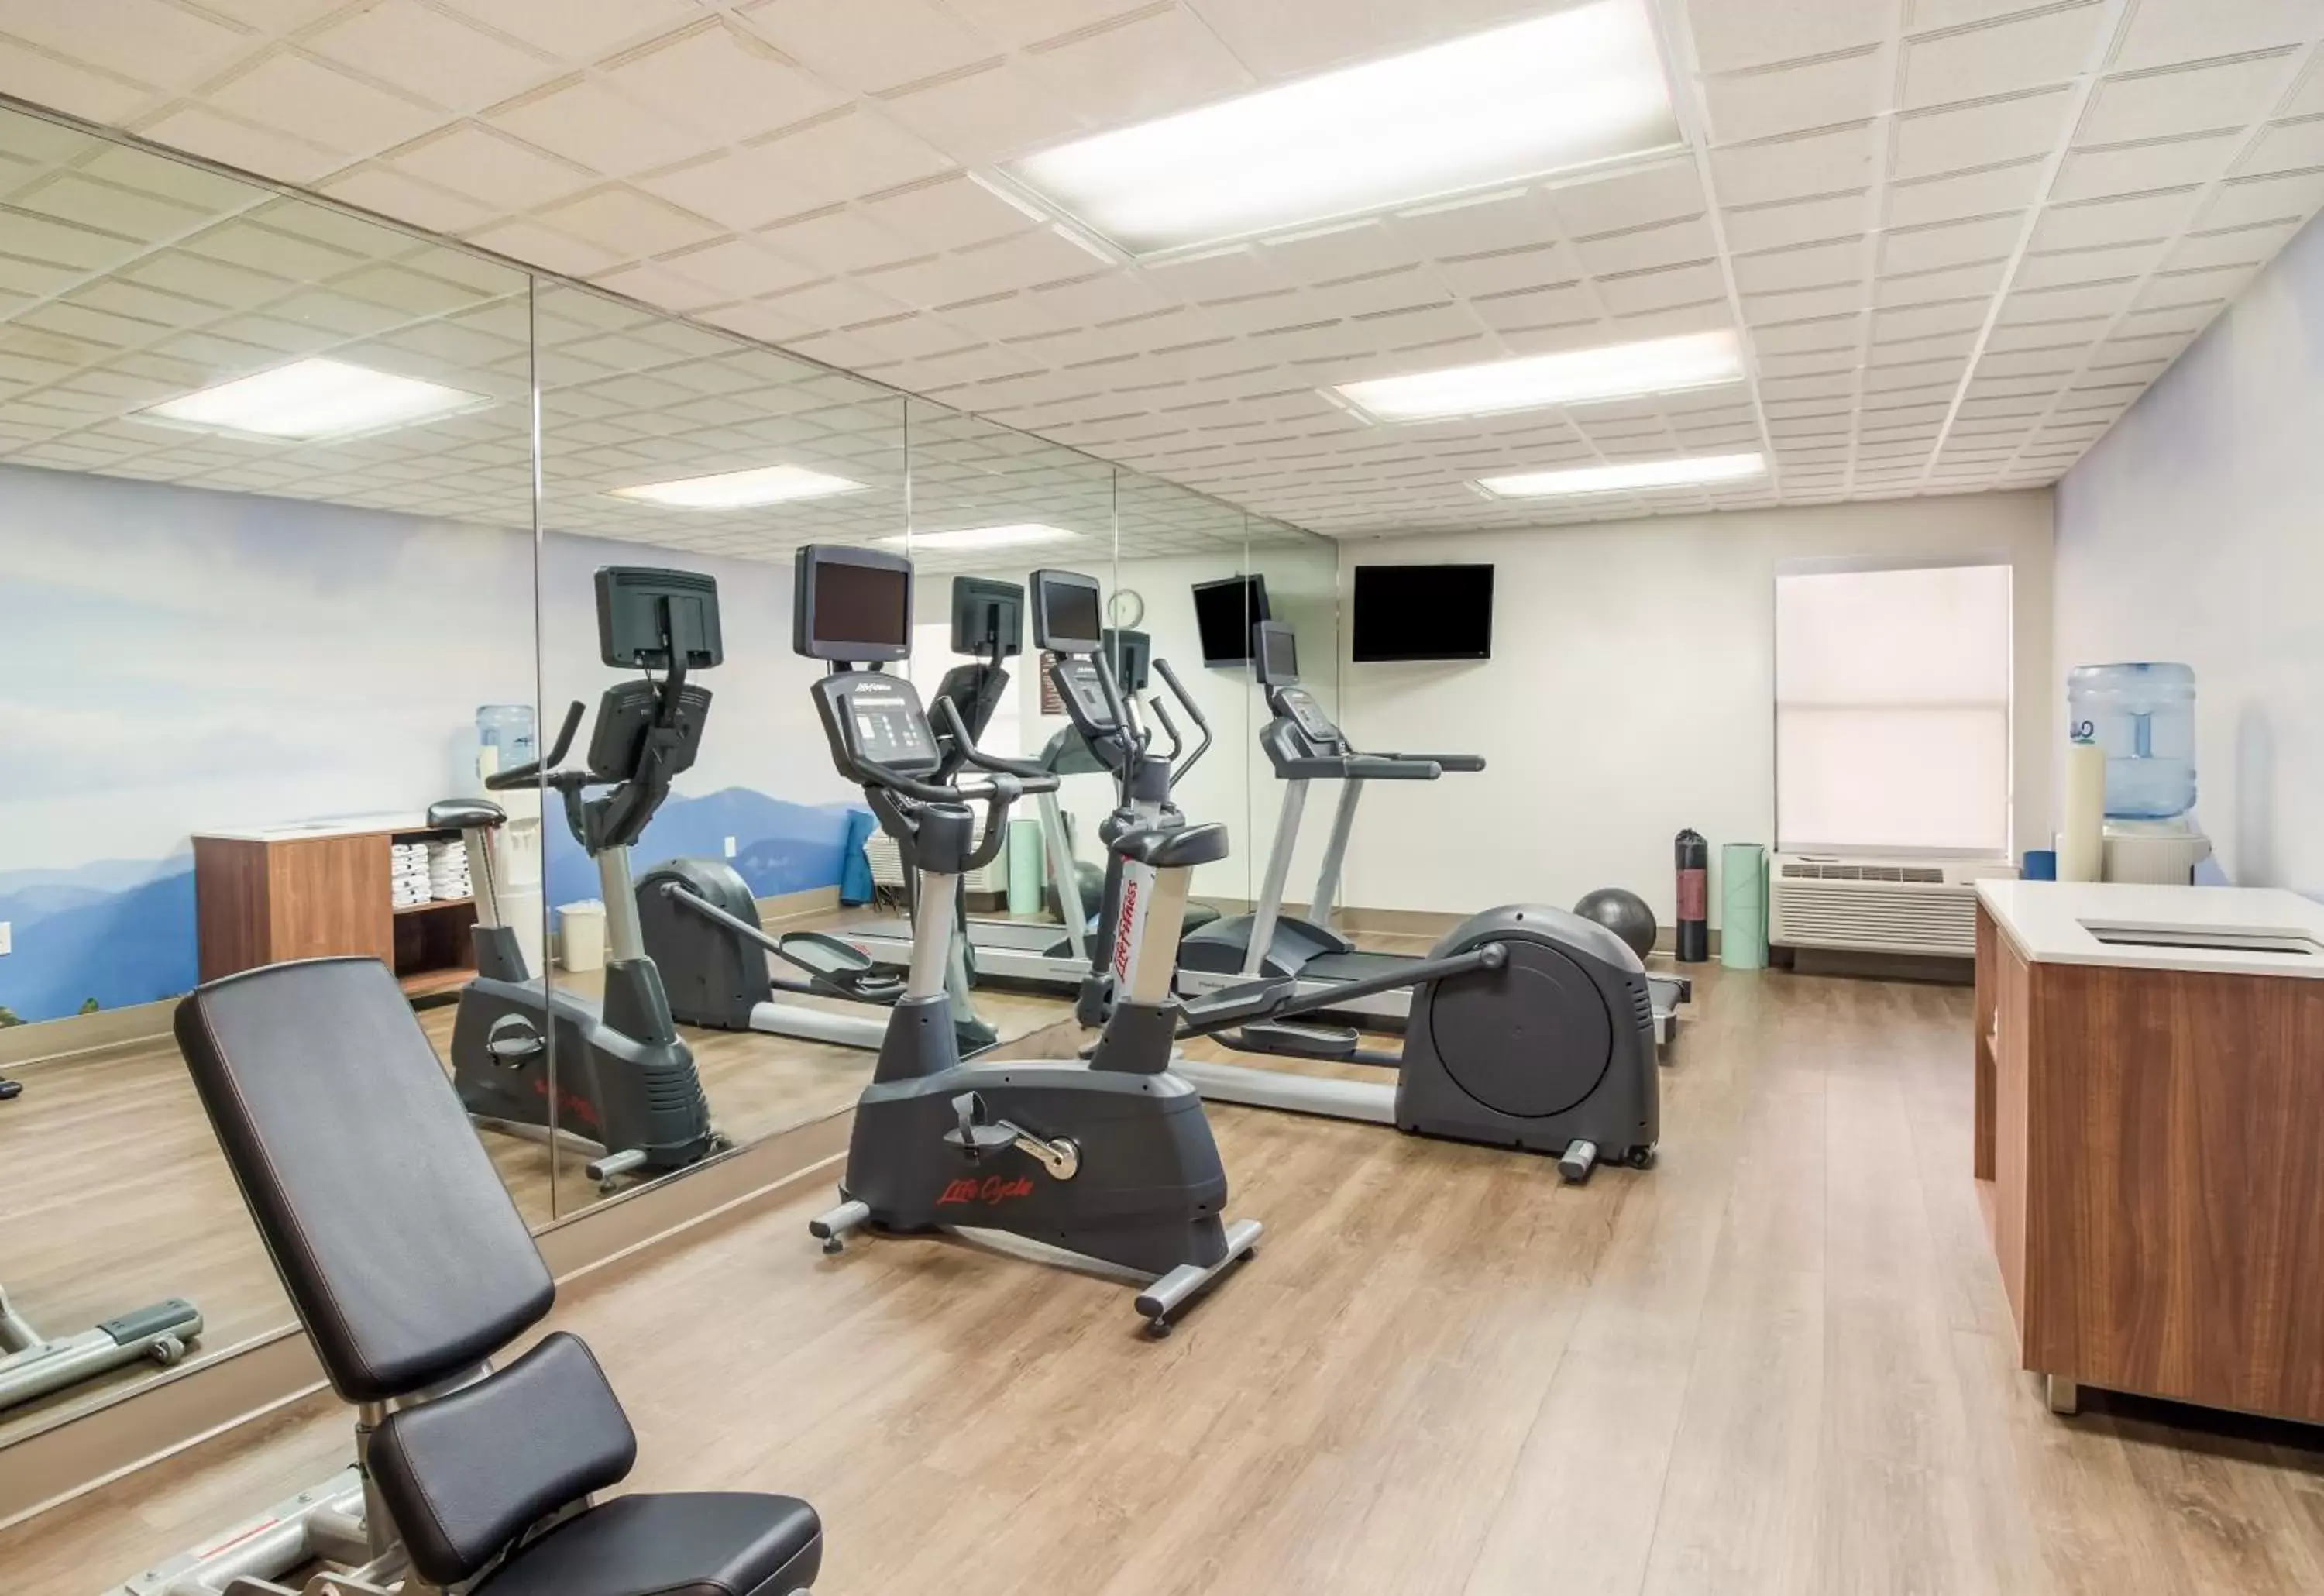 Fitness centre/facilities, Fitness Center/Facilities in Clarion Pointe New Bern